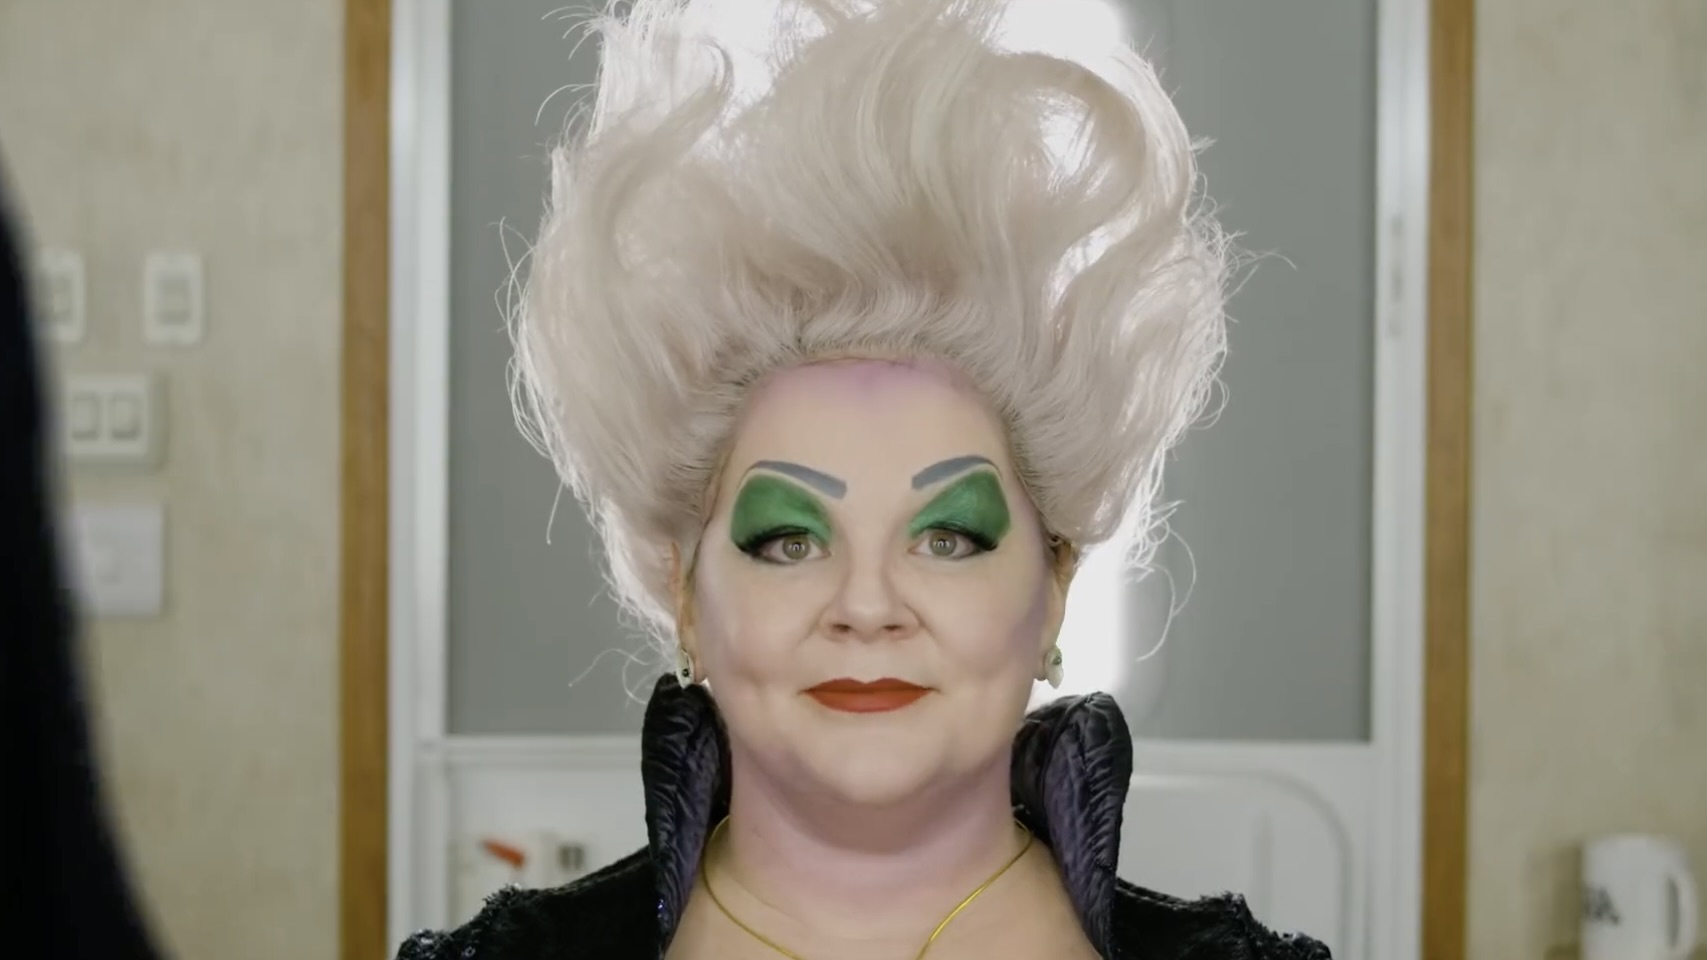 Melissa McCarthy as Ursula in The Little Mermaid.